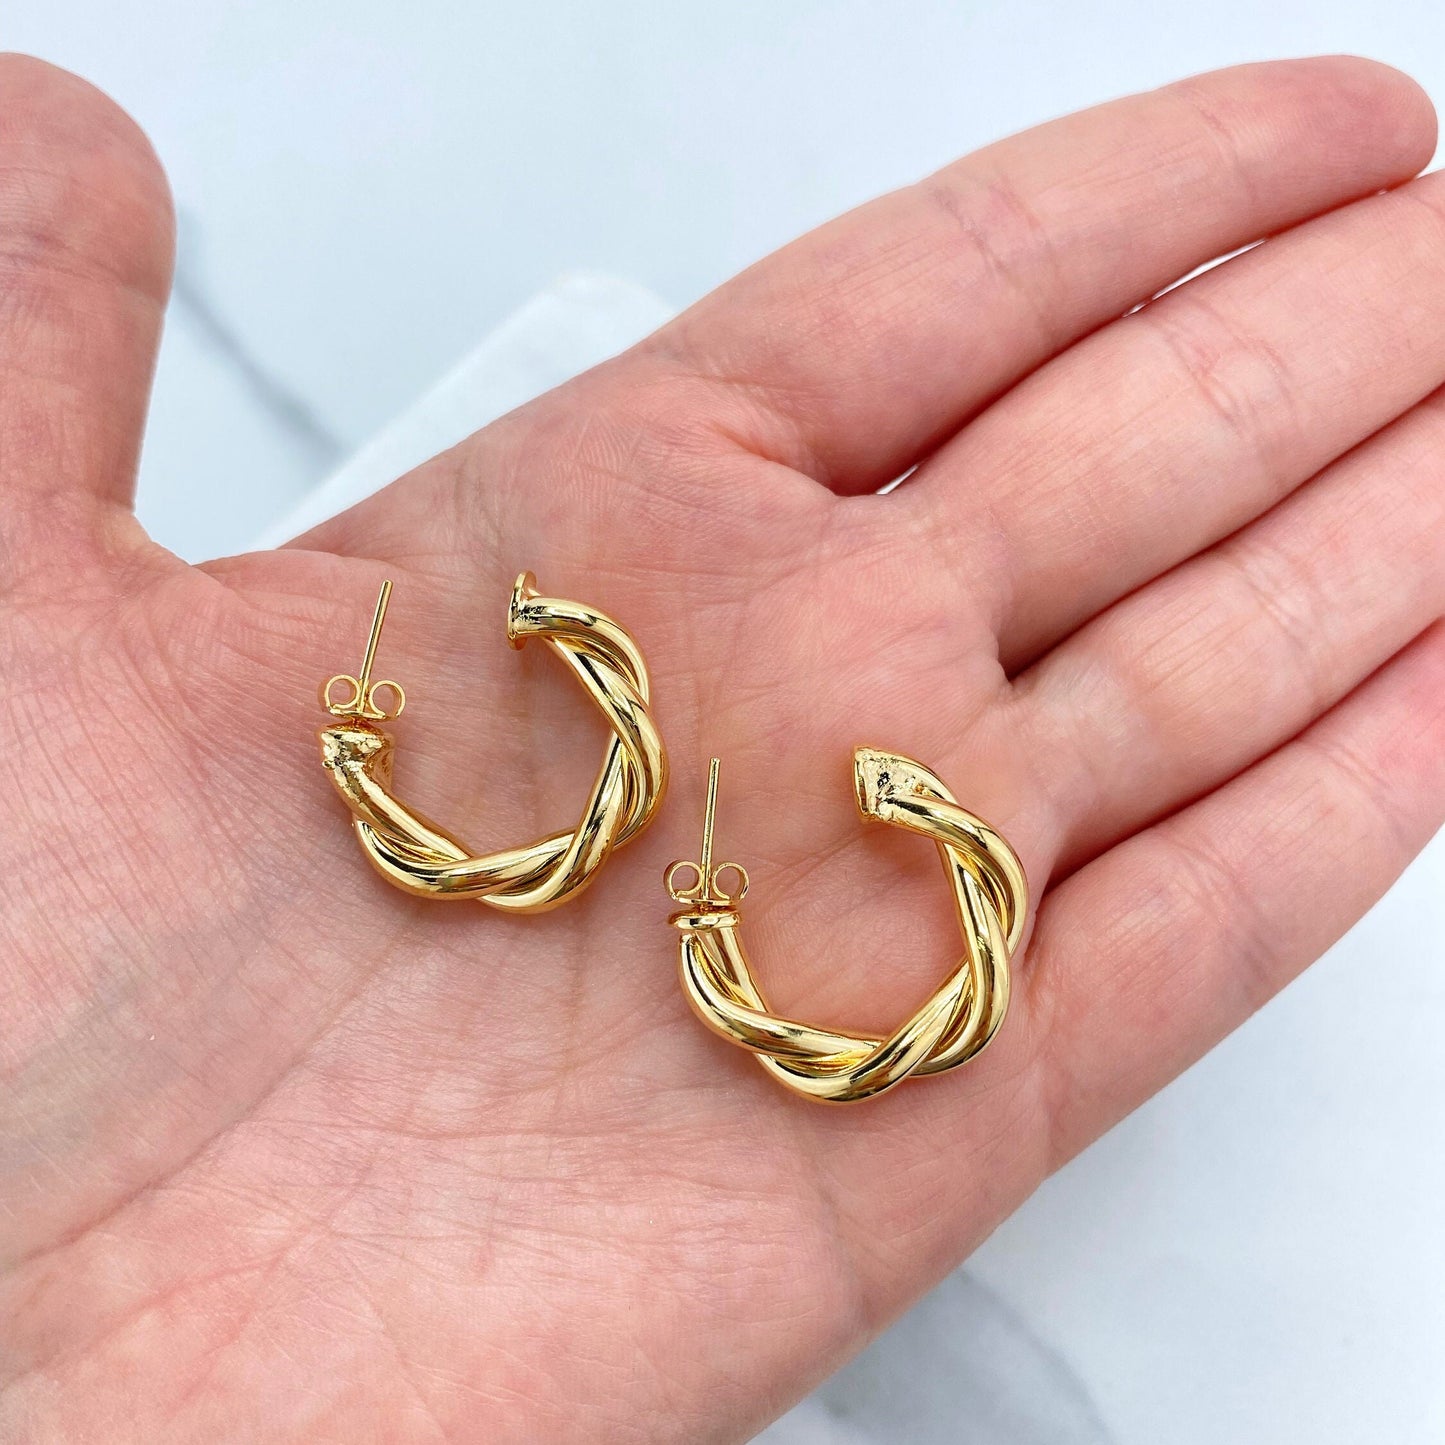 18k Gold Filled Wholesale 25mm Twisted Hoop Wholesale Jewelry Making Supplies